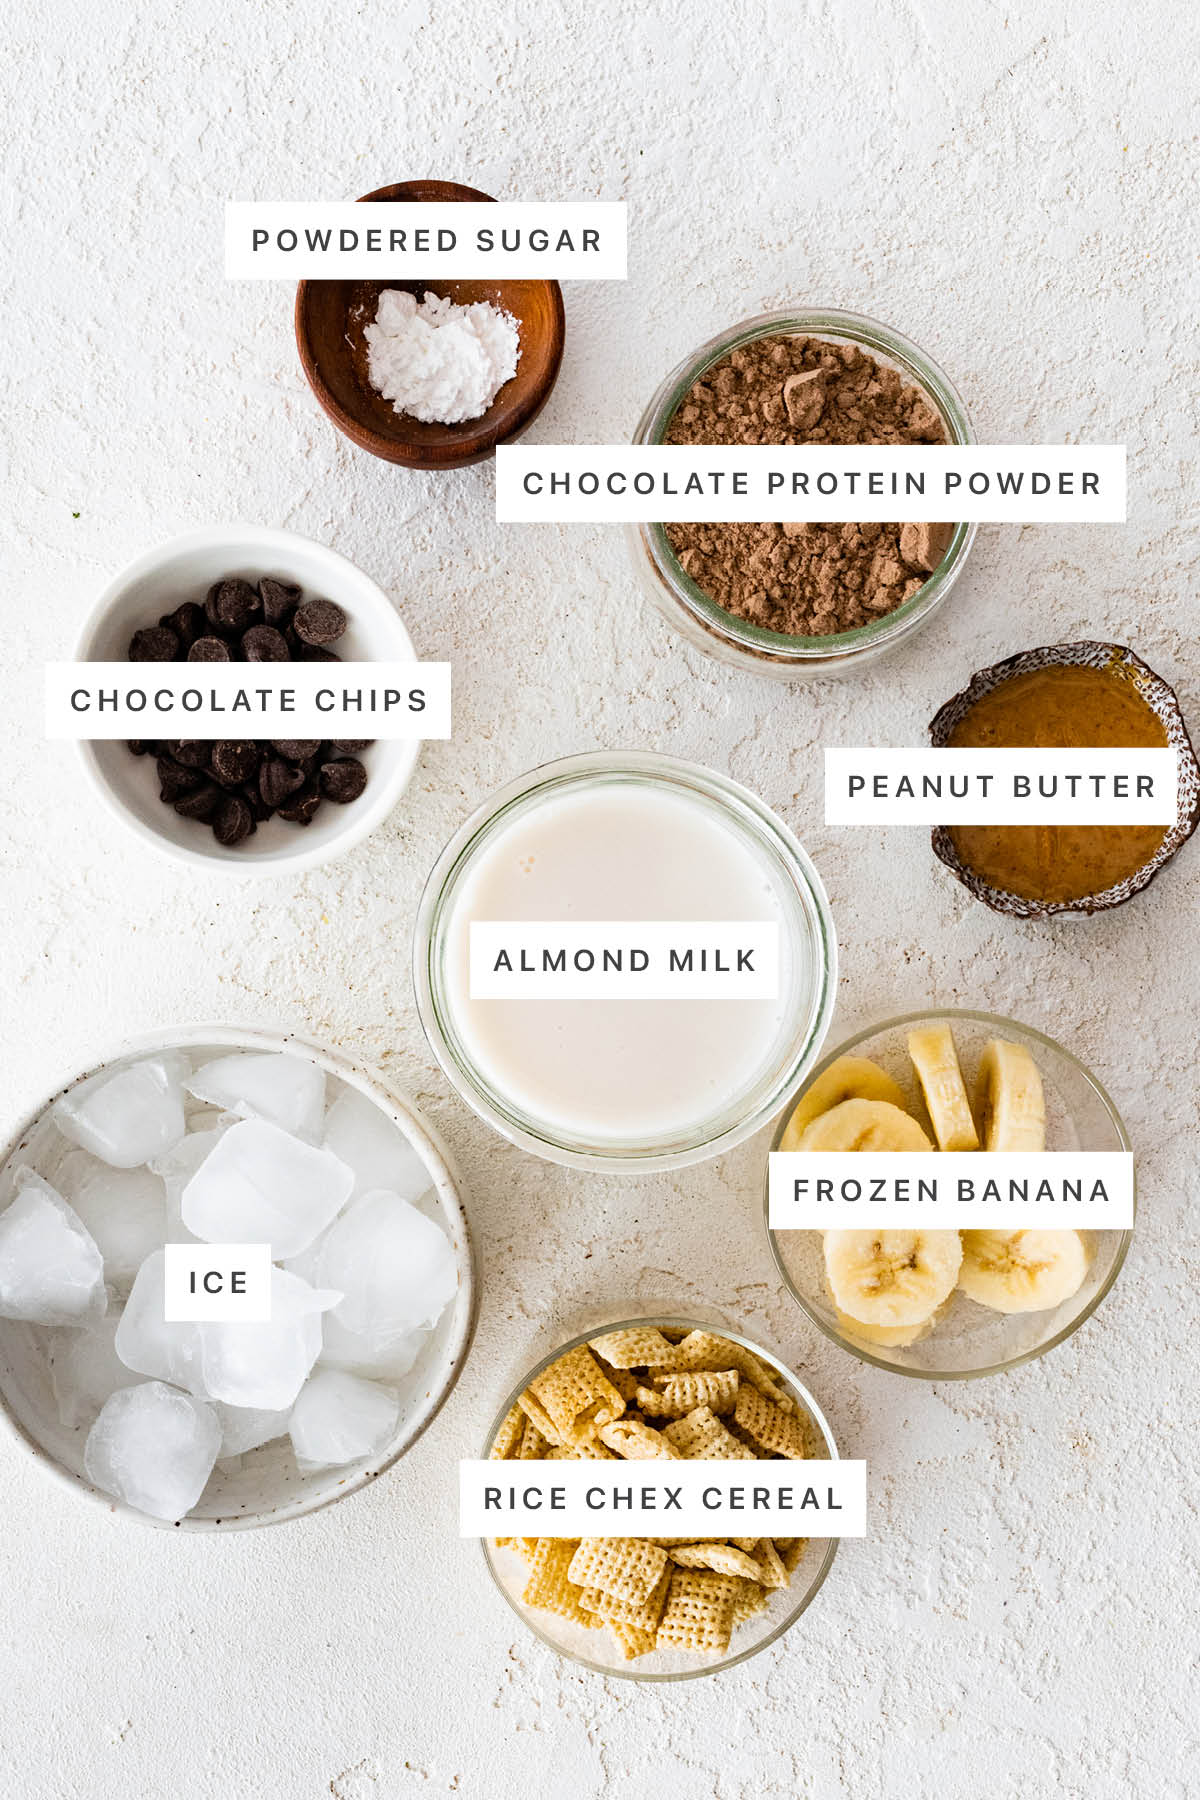 Ingredients measured out to make Muddy Buddy Protein Shake: powdered sugar, chocolate protein powder, chocolate chips, peanut butter, almond milk, ice, frozen banana and Rice Chex cereal.